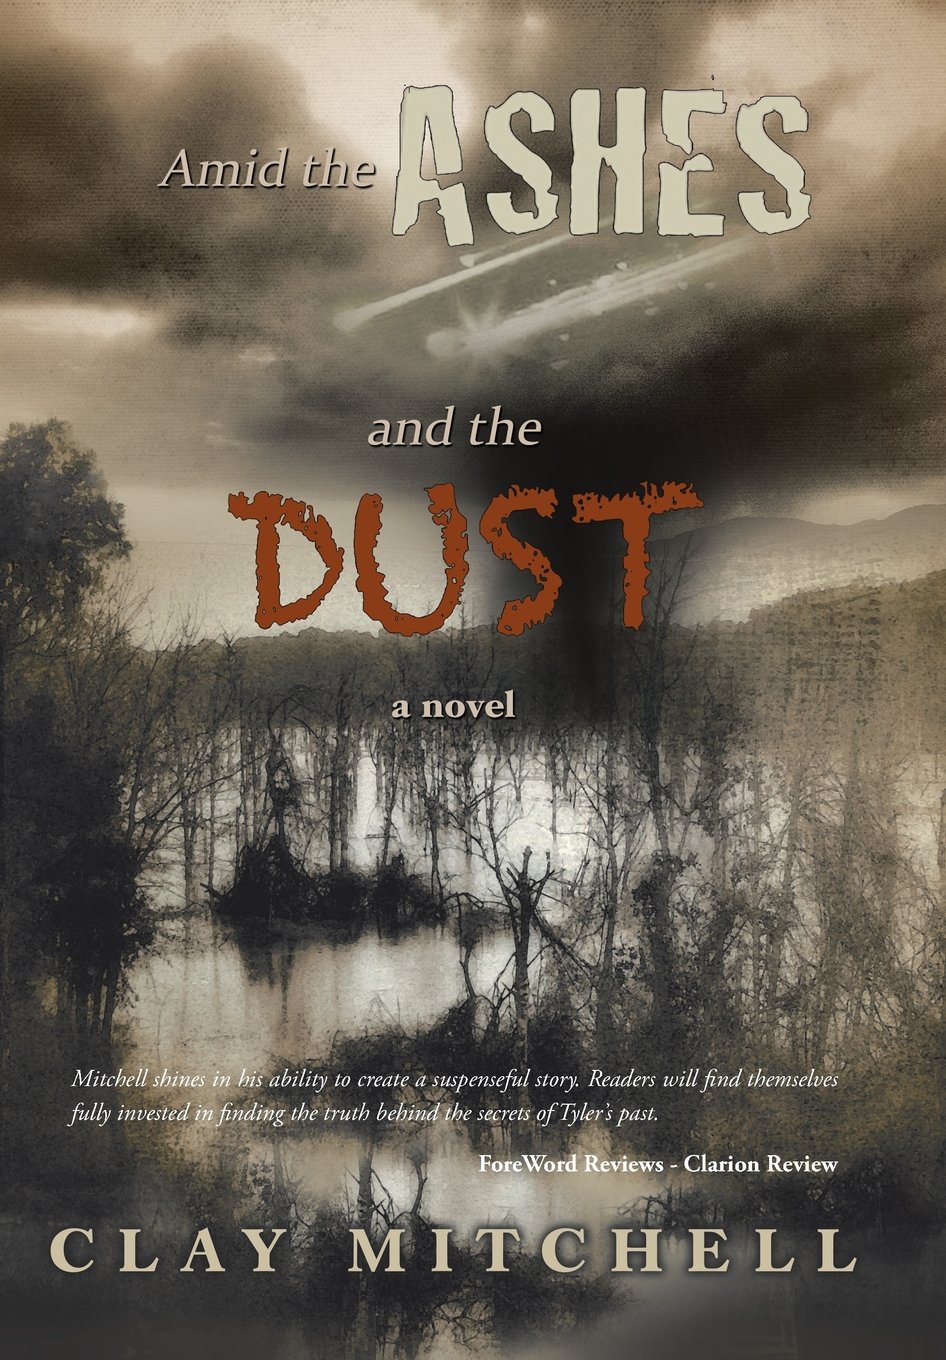 Amid the Ashes and the Dust